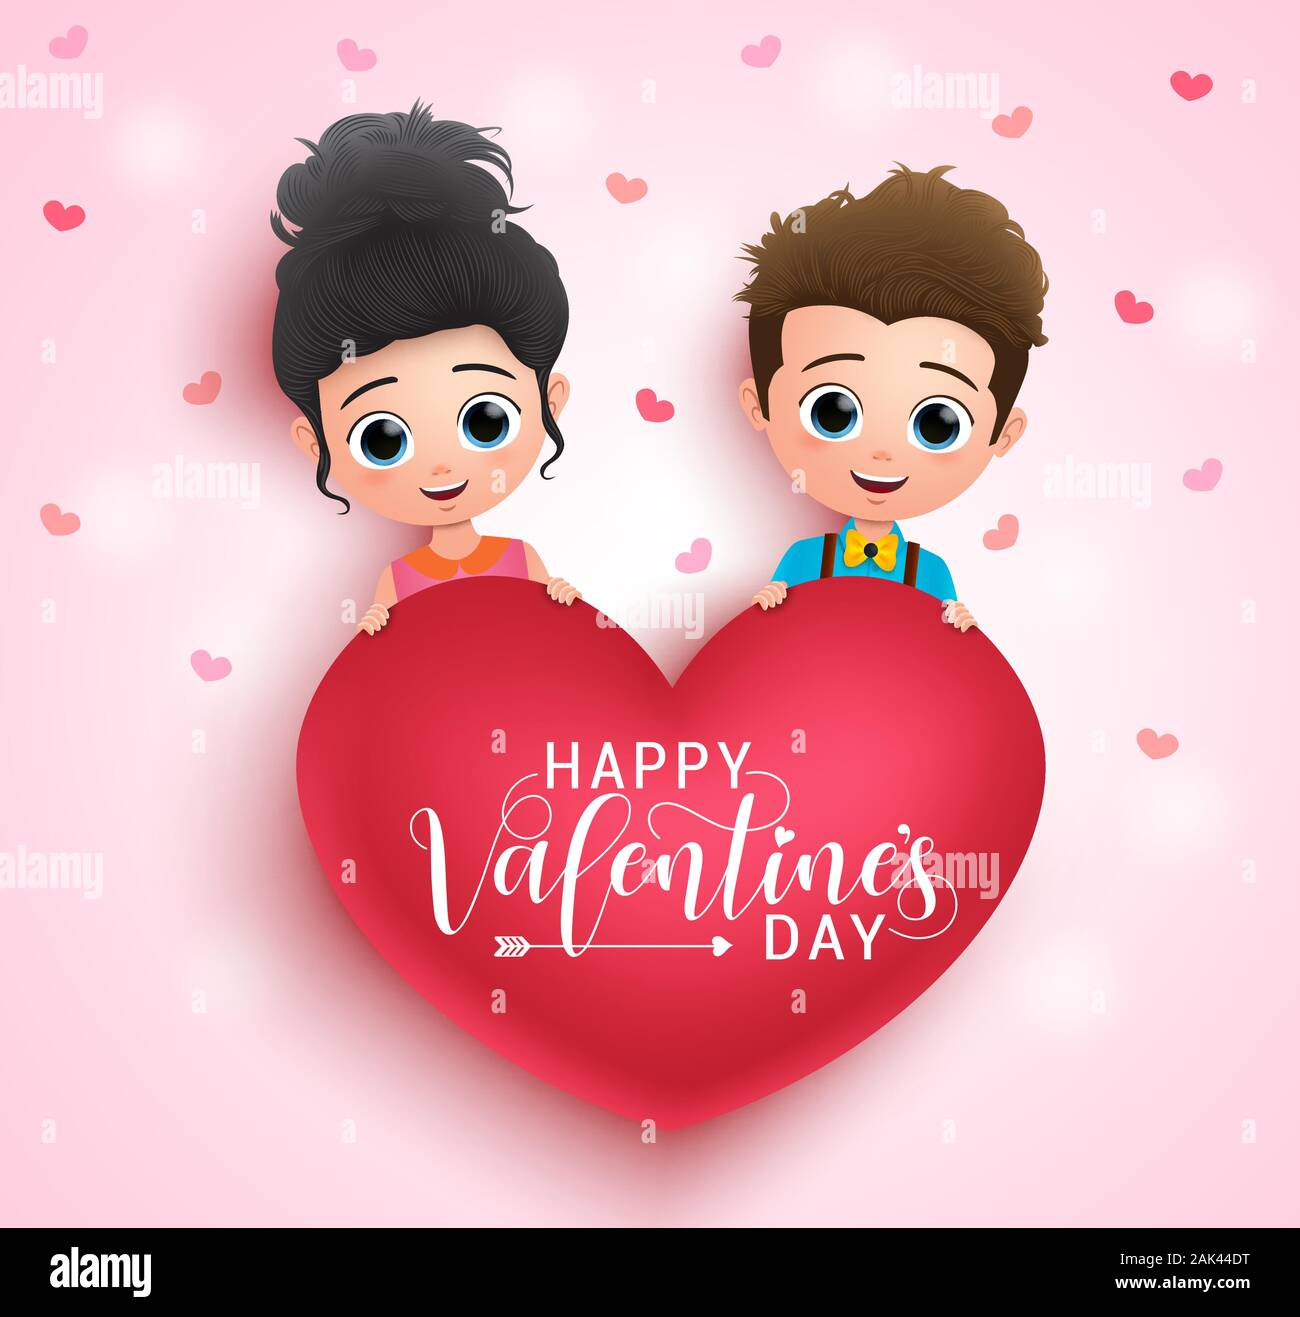 Valentine character vector banner design. Valentines couple characters  holding heart shape element with happy valentines day greeting typography  Stock Vector Image & Art - Alamy